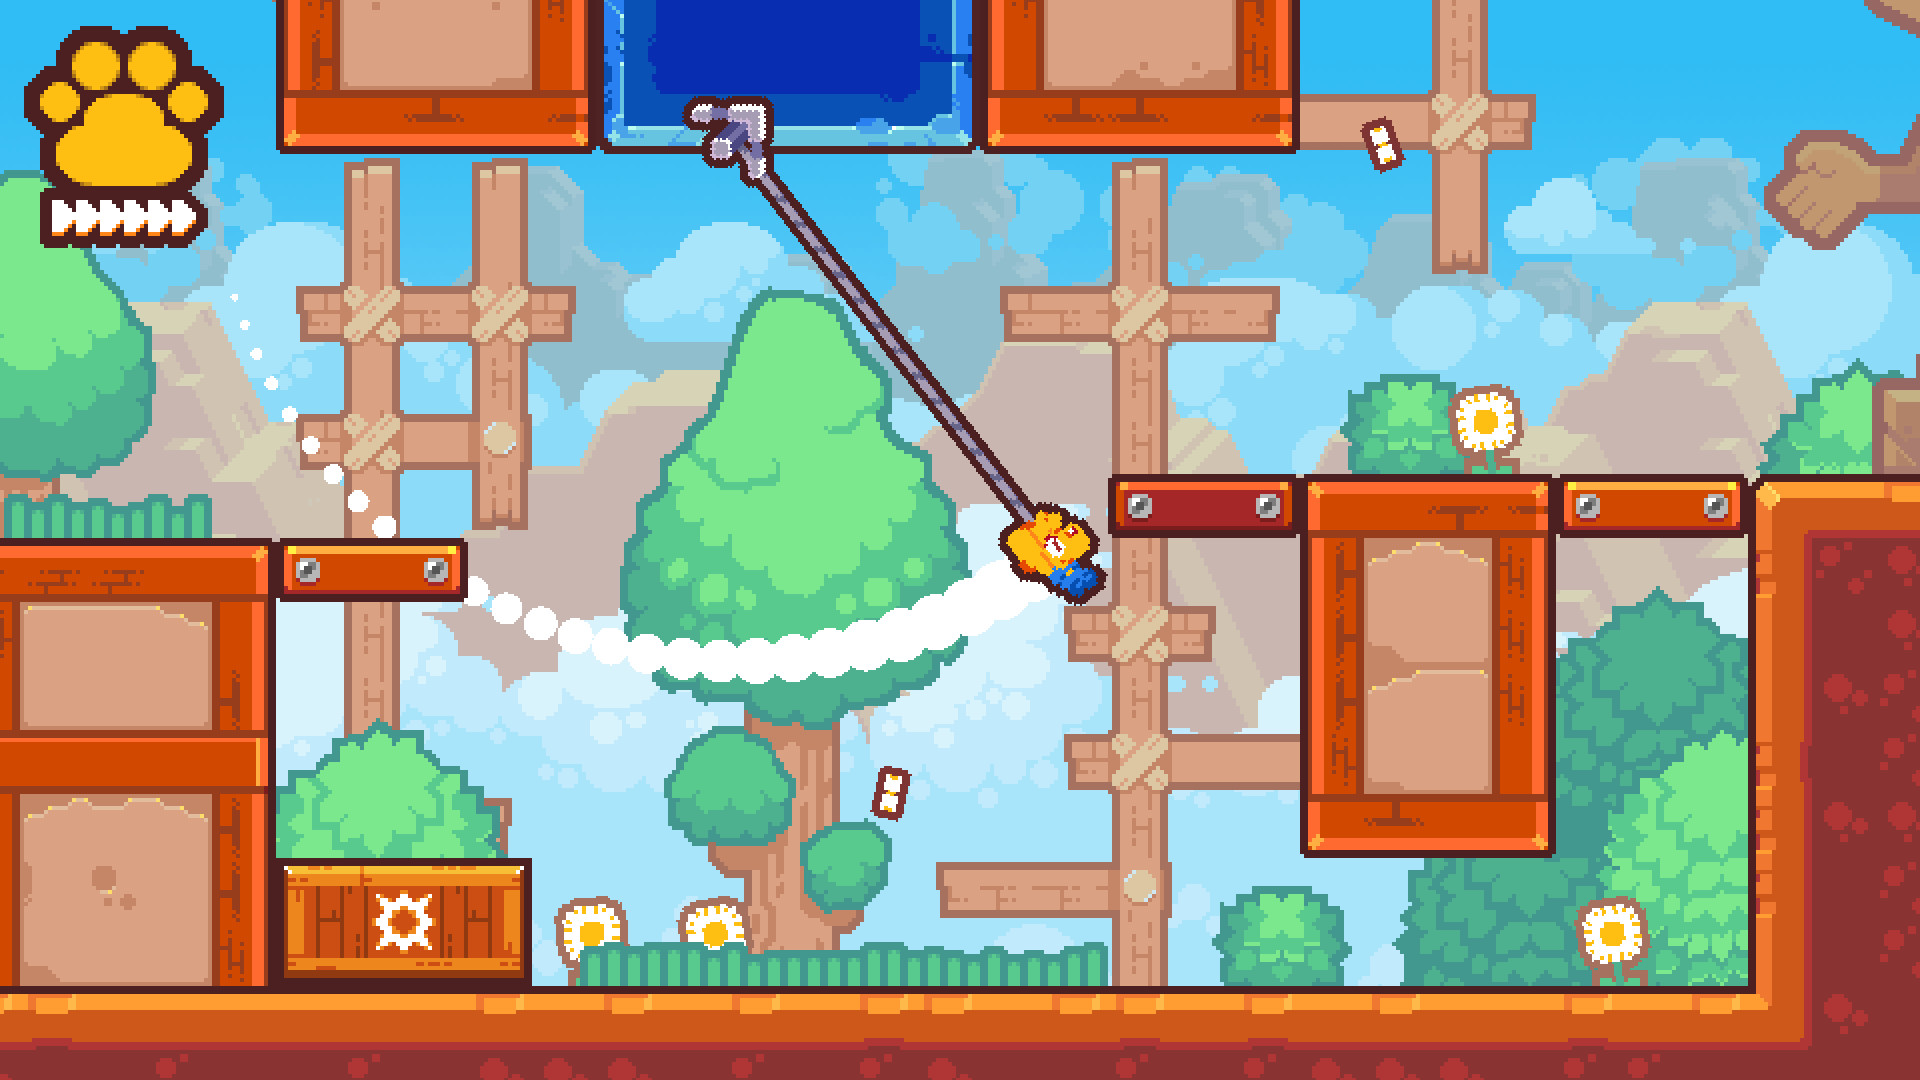 A screenshot of Grapple Dog, a 2D platformer, showing a dog using a grappling hook. It's cute and colourful.